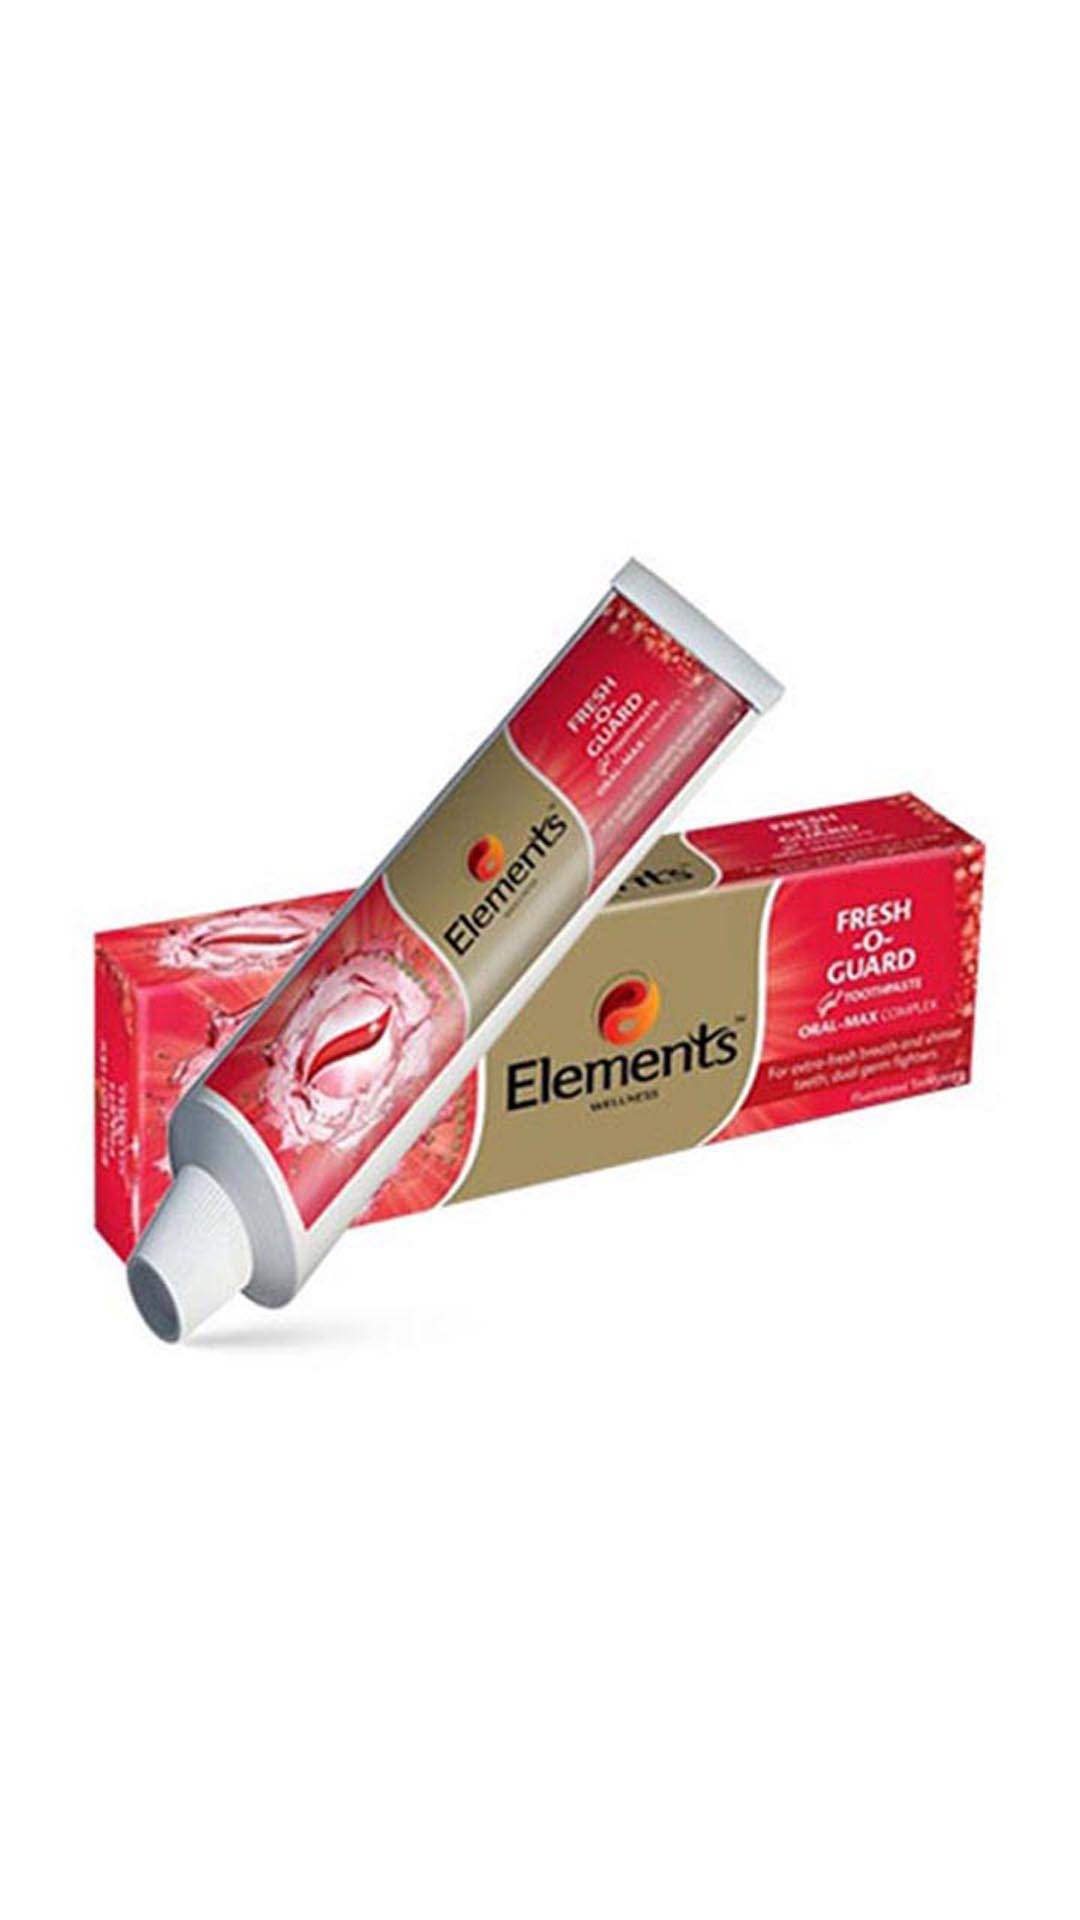 Buy Elements Fresho-Guard Toothpaste at Best Price Online